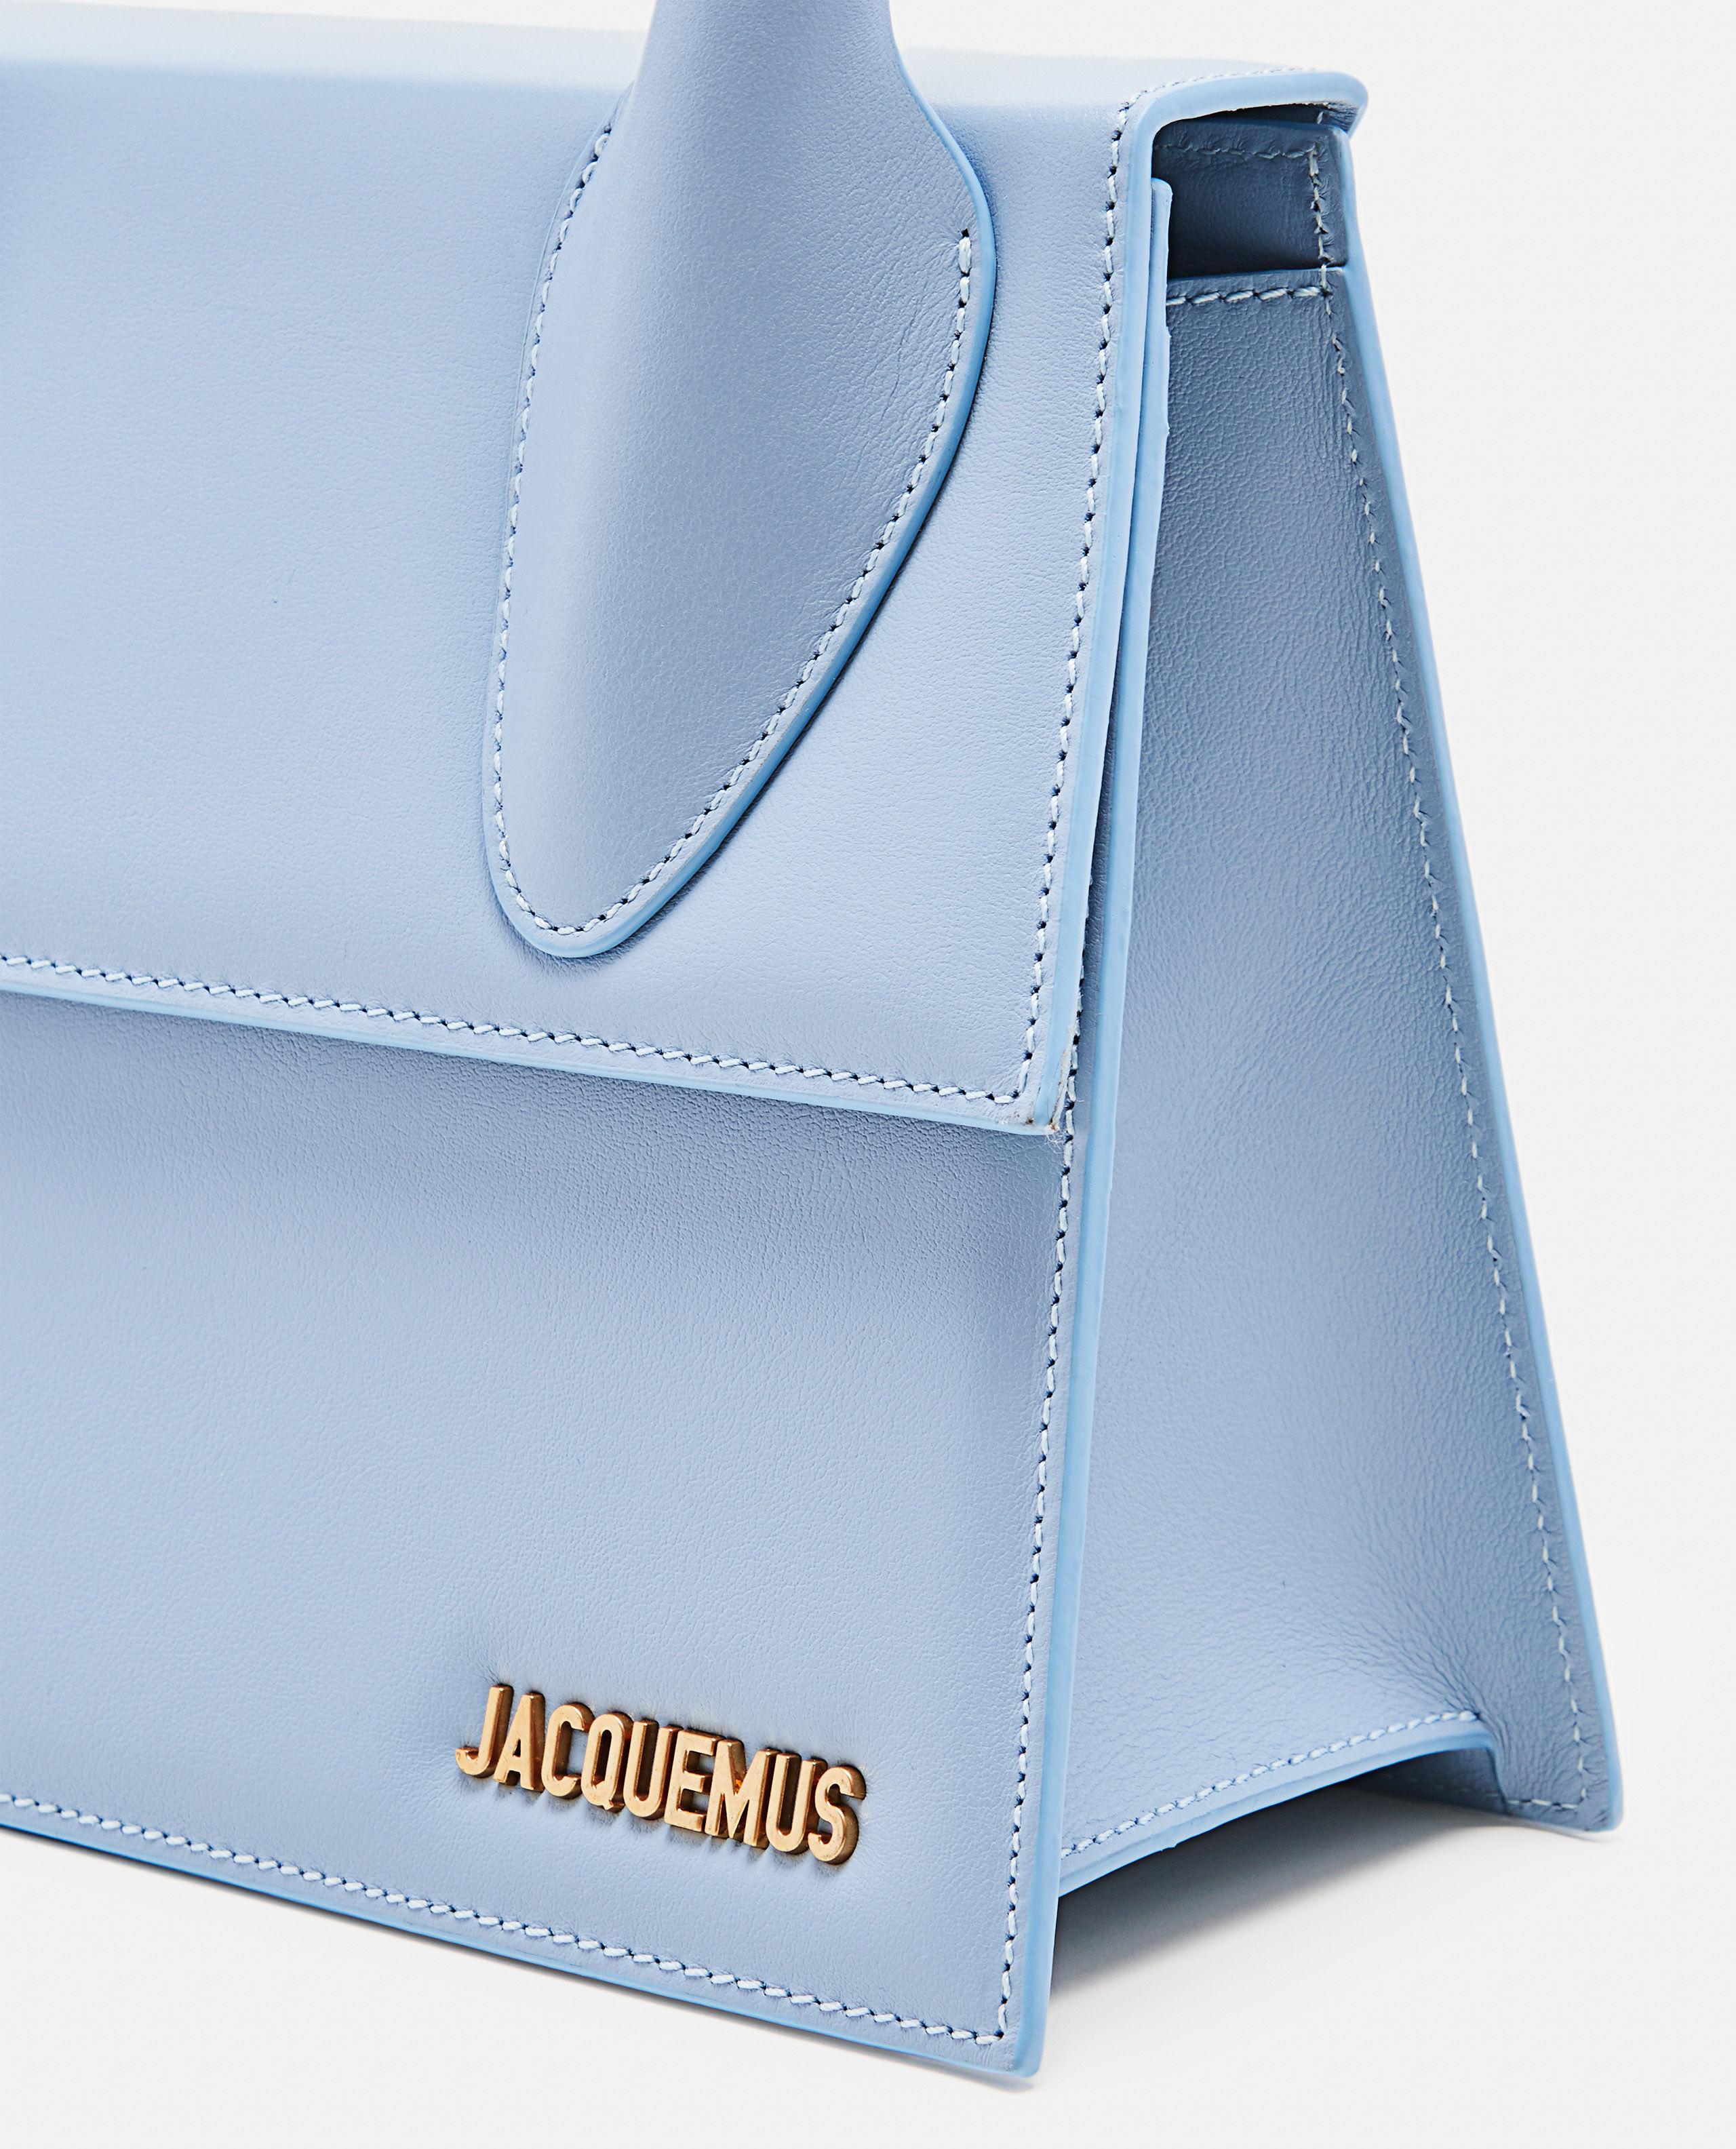 Jacquemus Le Grand Chiquito Bag in Blue | Lyst